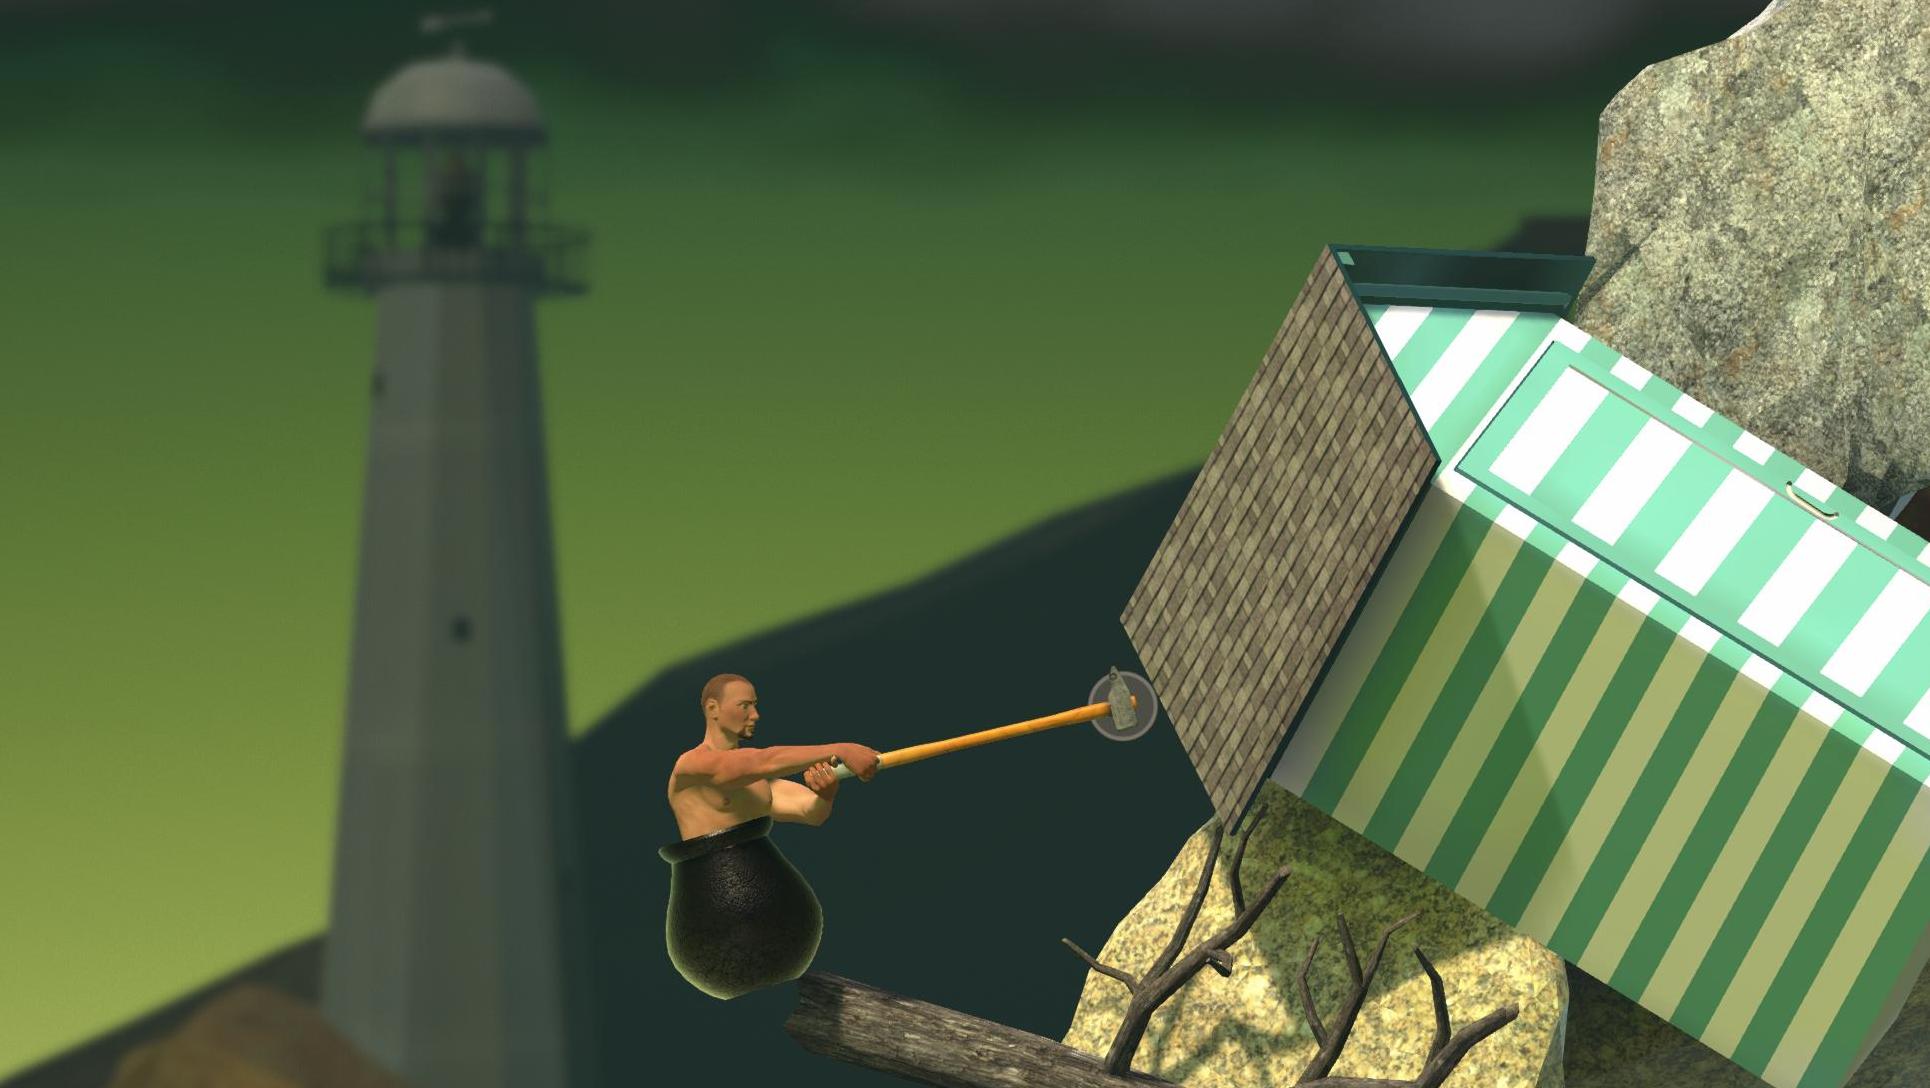 1514425580 getting over it with bennett foddy - Getting Over It With Bennett Foddy Mod Apk V1.9.4 (Unlocked)